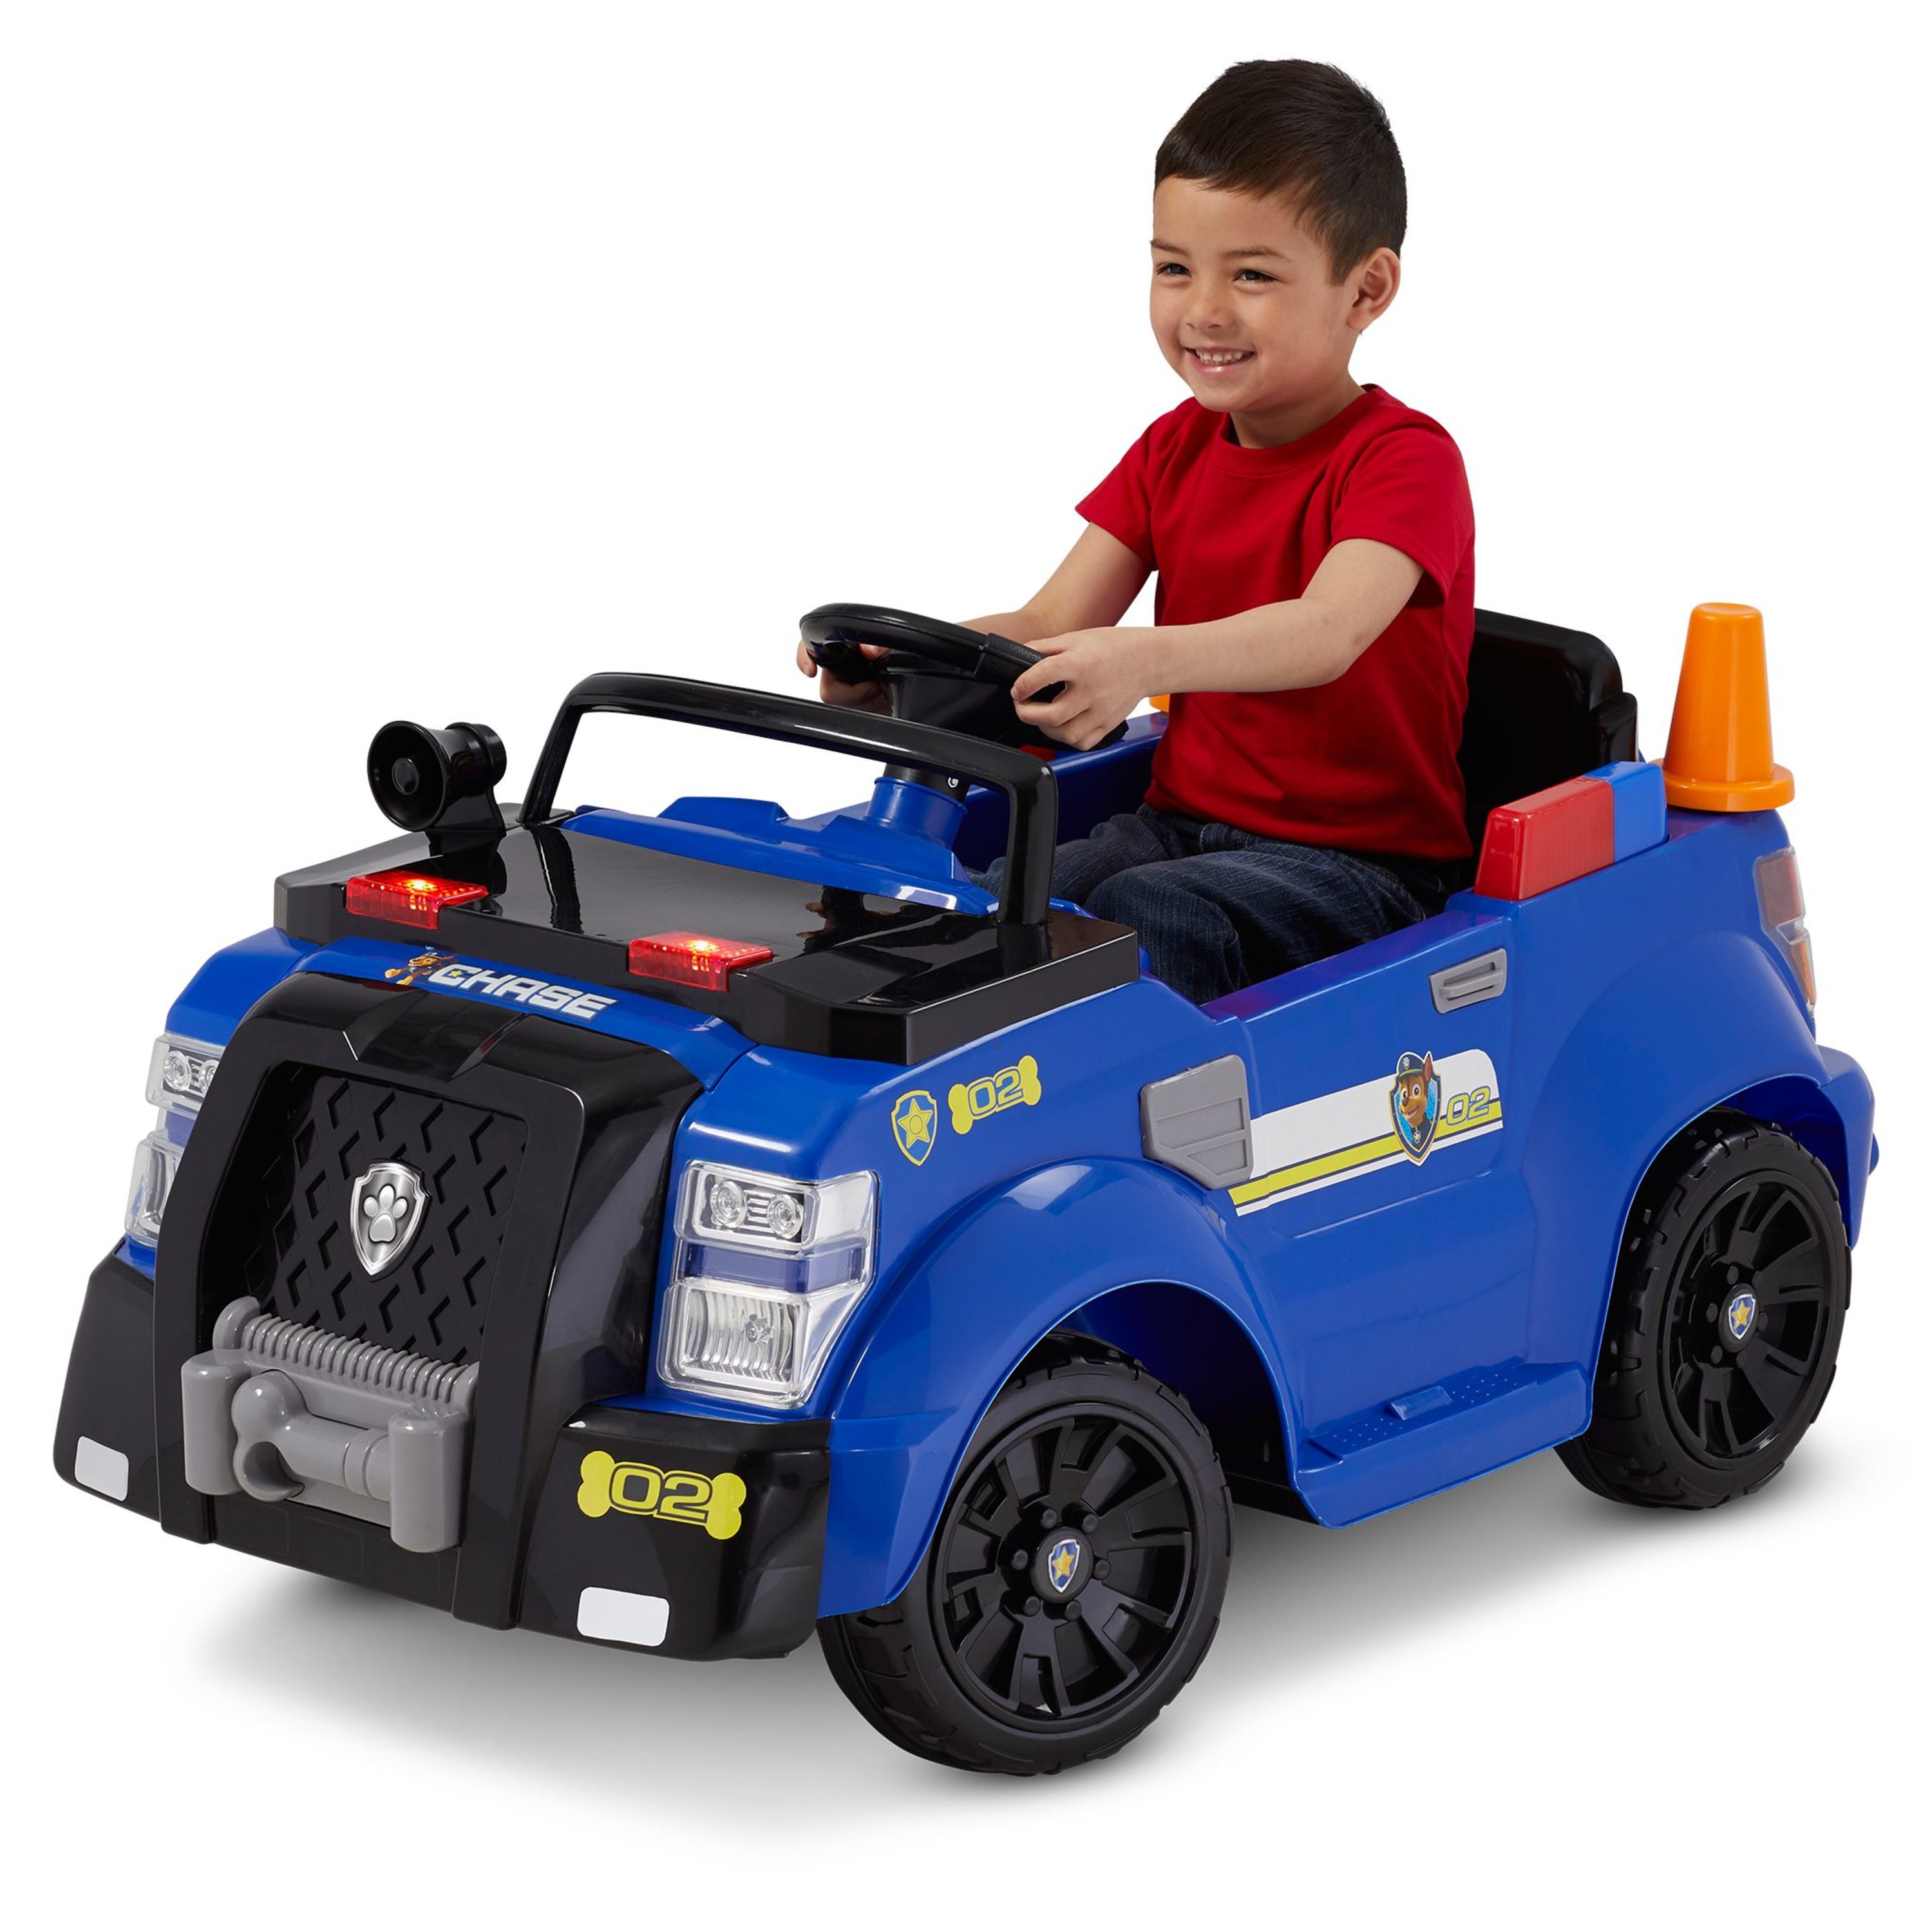 Nickelodeon's PAW Patrol: Chase Police Cruiser, 6-Volt Ride-On Toy by Kid Trax - image 3 of 9